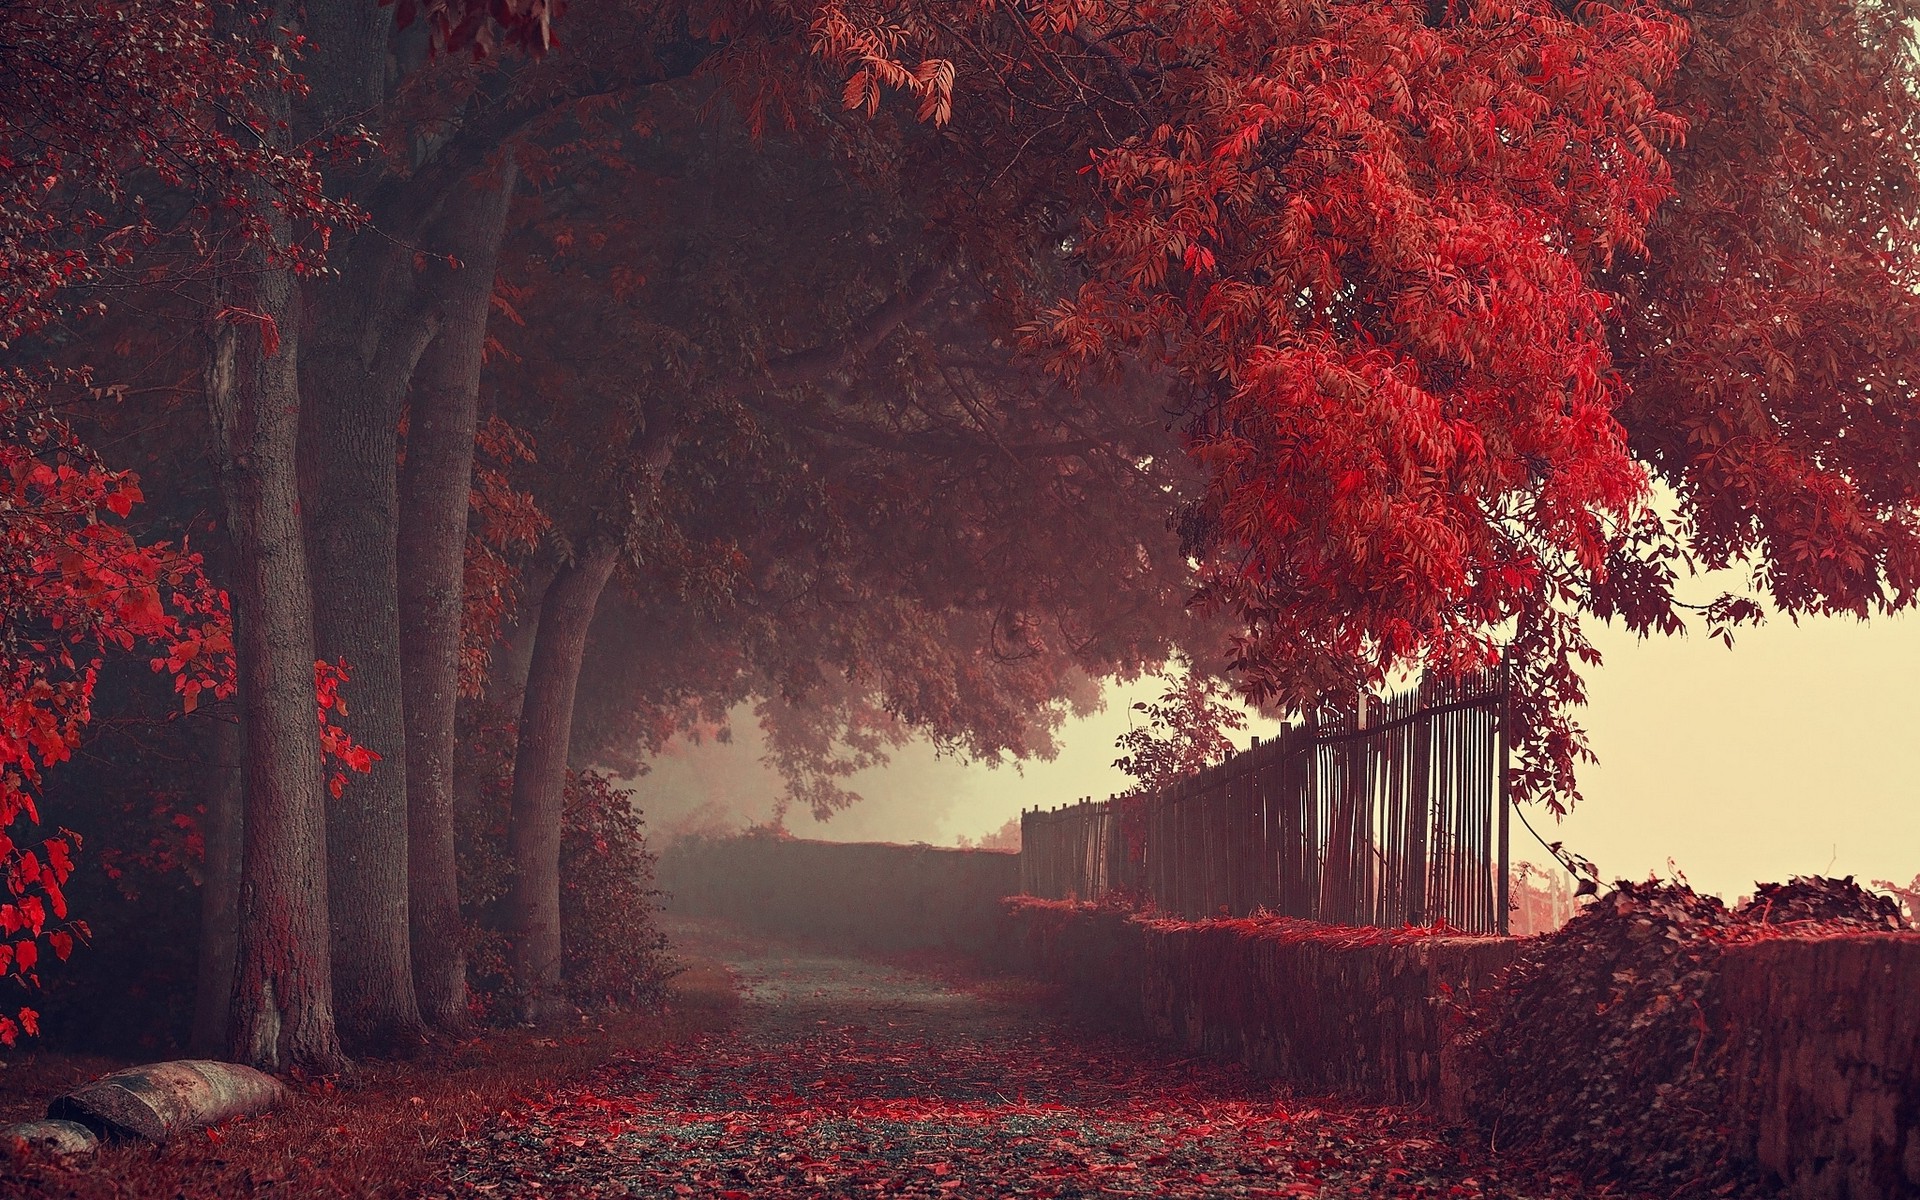 Wallpaper, sunlight, trees, landscape, forest, fall, leaves, night, nature, red, sky, road, branch, sunrise, evening, morning, mist, atmosphere, fence, path, autumn, dawn, darkness, 1920x1200 px, woodland, grove, computer wallpaper, deciduous, maple